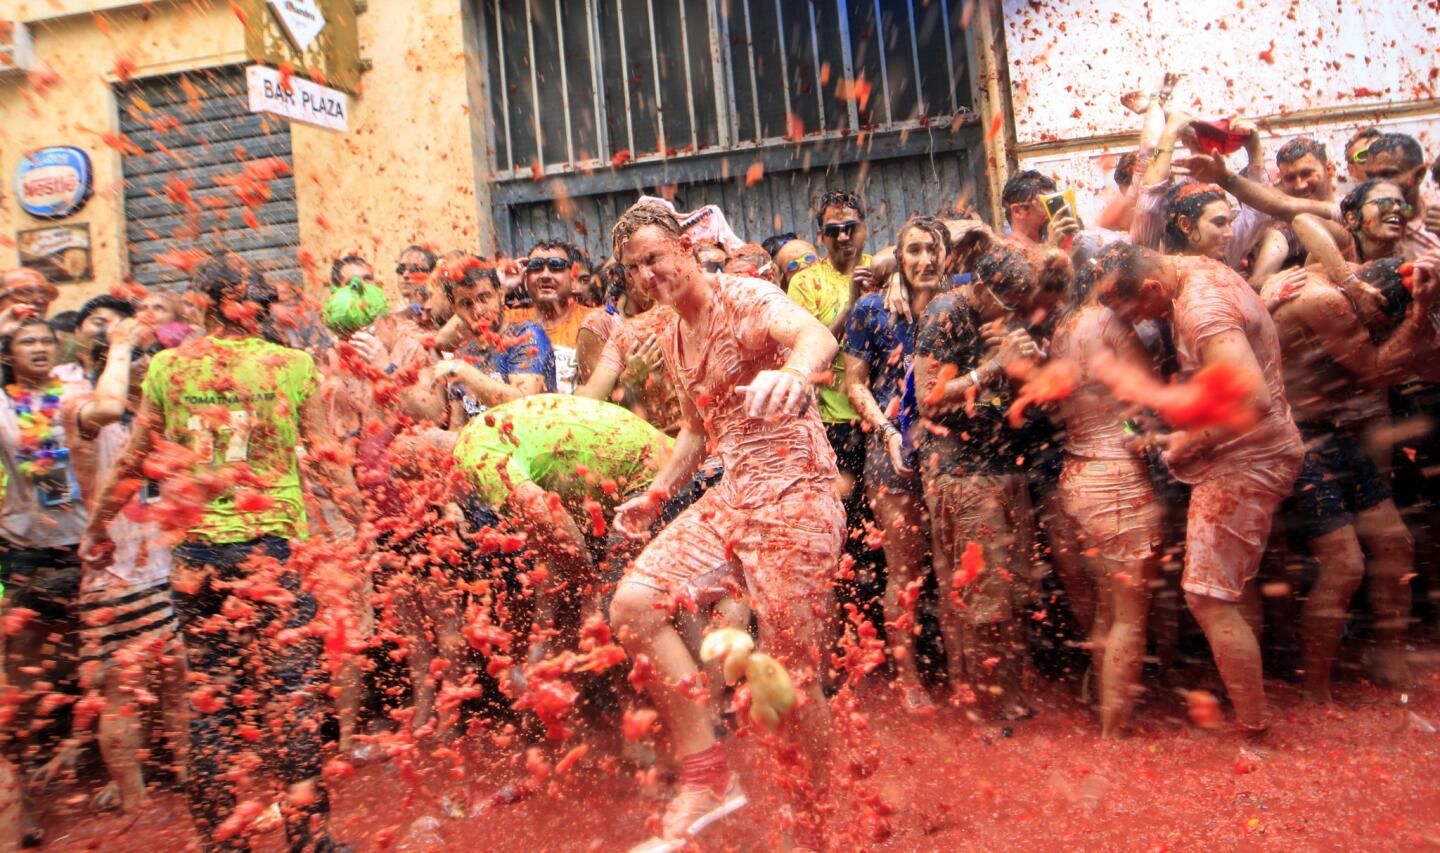 Revelers enjoy as they throw tomatoes at each other, during the annual "Tomatina", tomato fight fiesta, in the village of Bunol, 50 kilometers outside Valencia, Spain, Wednesday, Aug. 30, 2017.